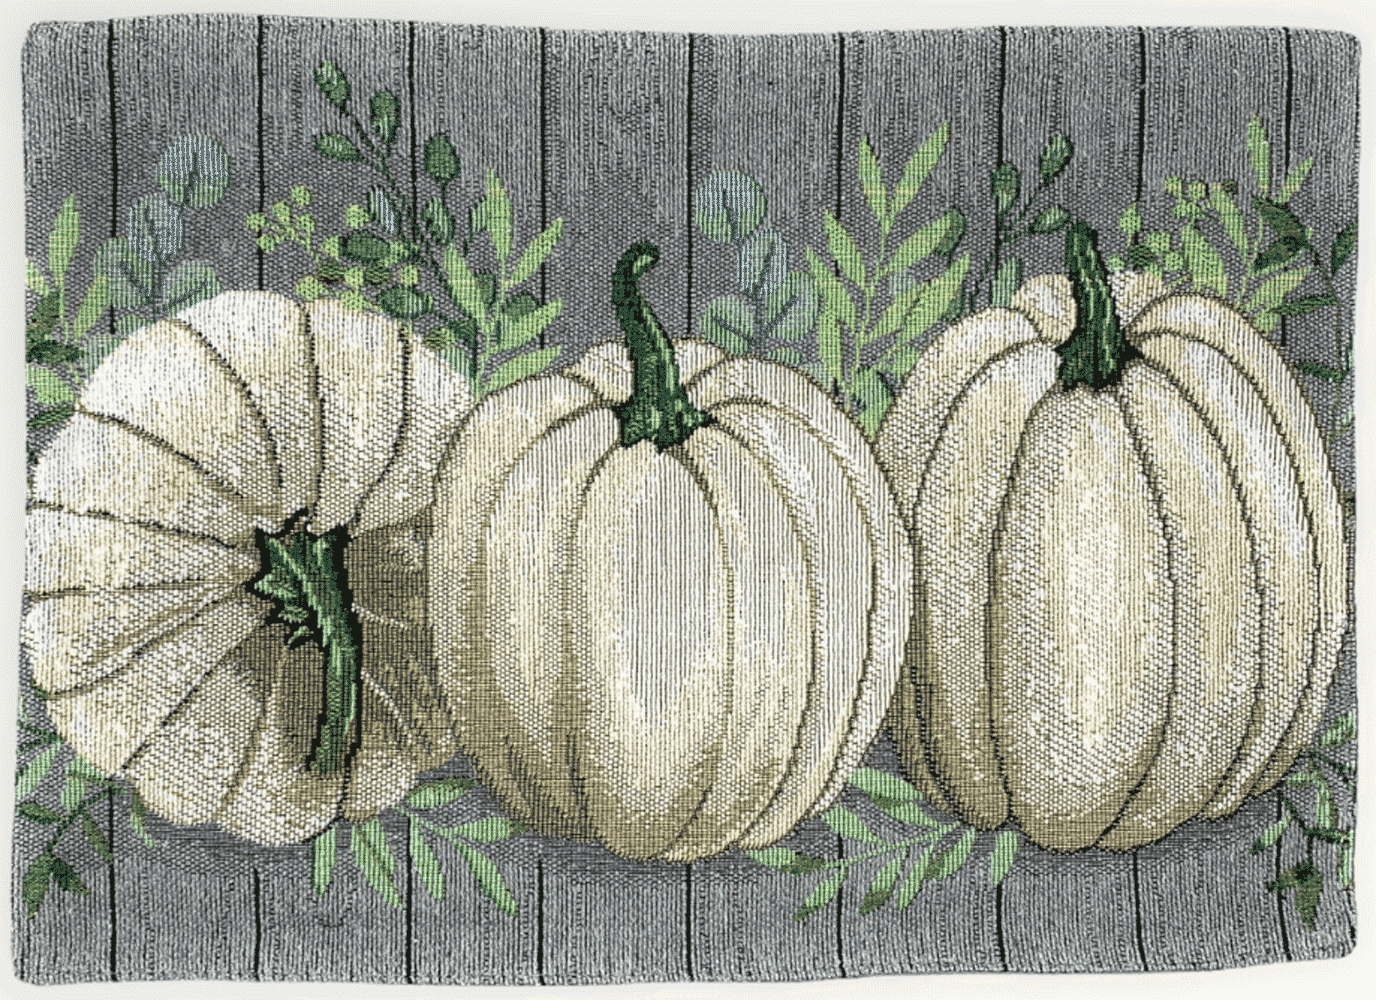 Windham Home Autumn Fall Thanksgiving Themed Tapestry Placemats, Set of 4  (White Pumpkin Trio)